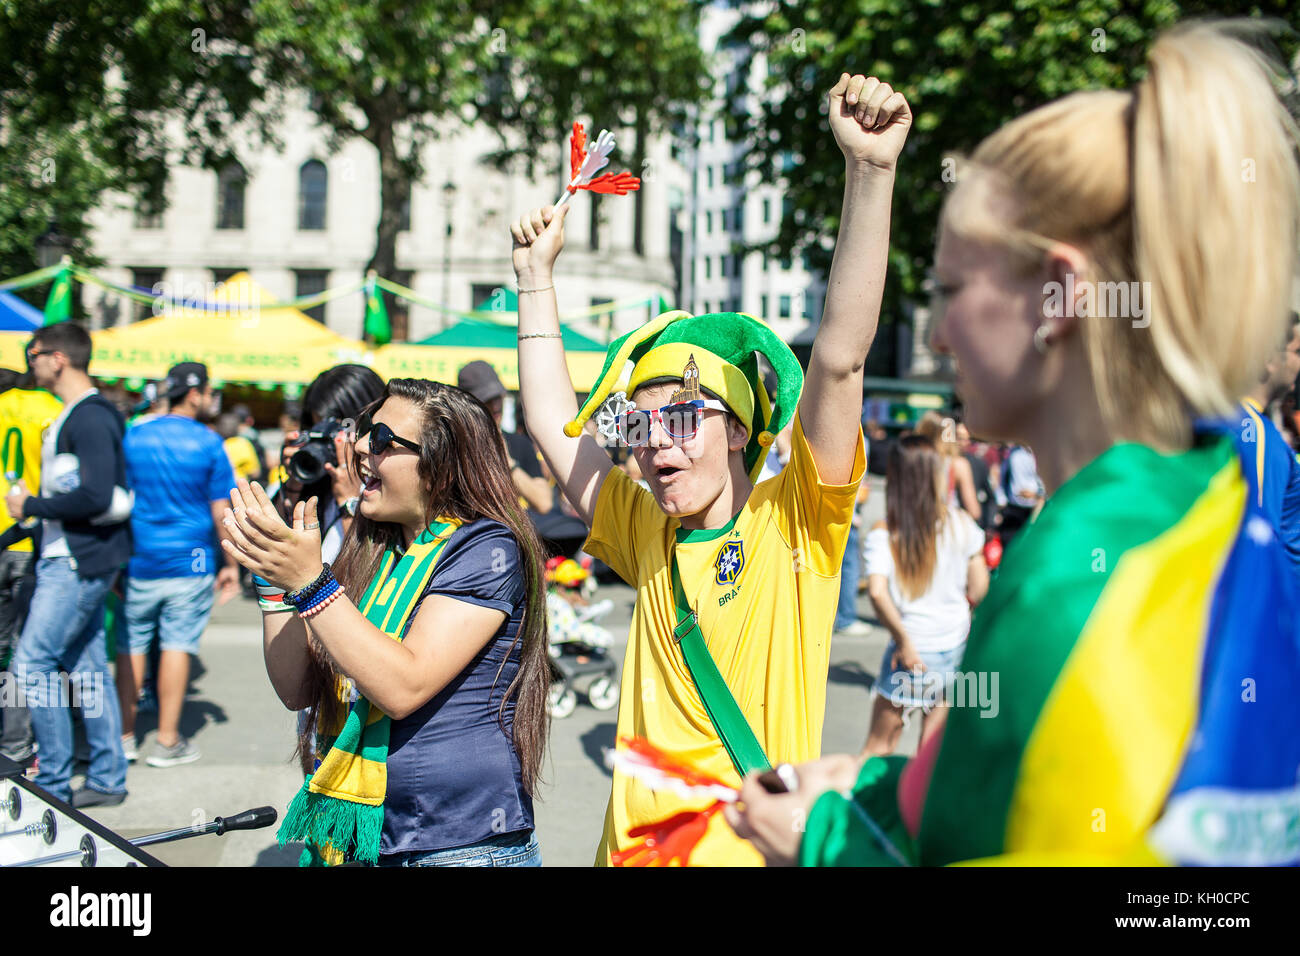 Two Brazilians kill the waiting time playing table footbaal and warm up for the FIFA World Cup at ’Brazil Day’ at Trafalgar Square in London. It looks like we have a winner. UK 12/06 2014. Stock Photo